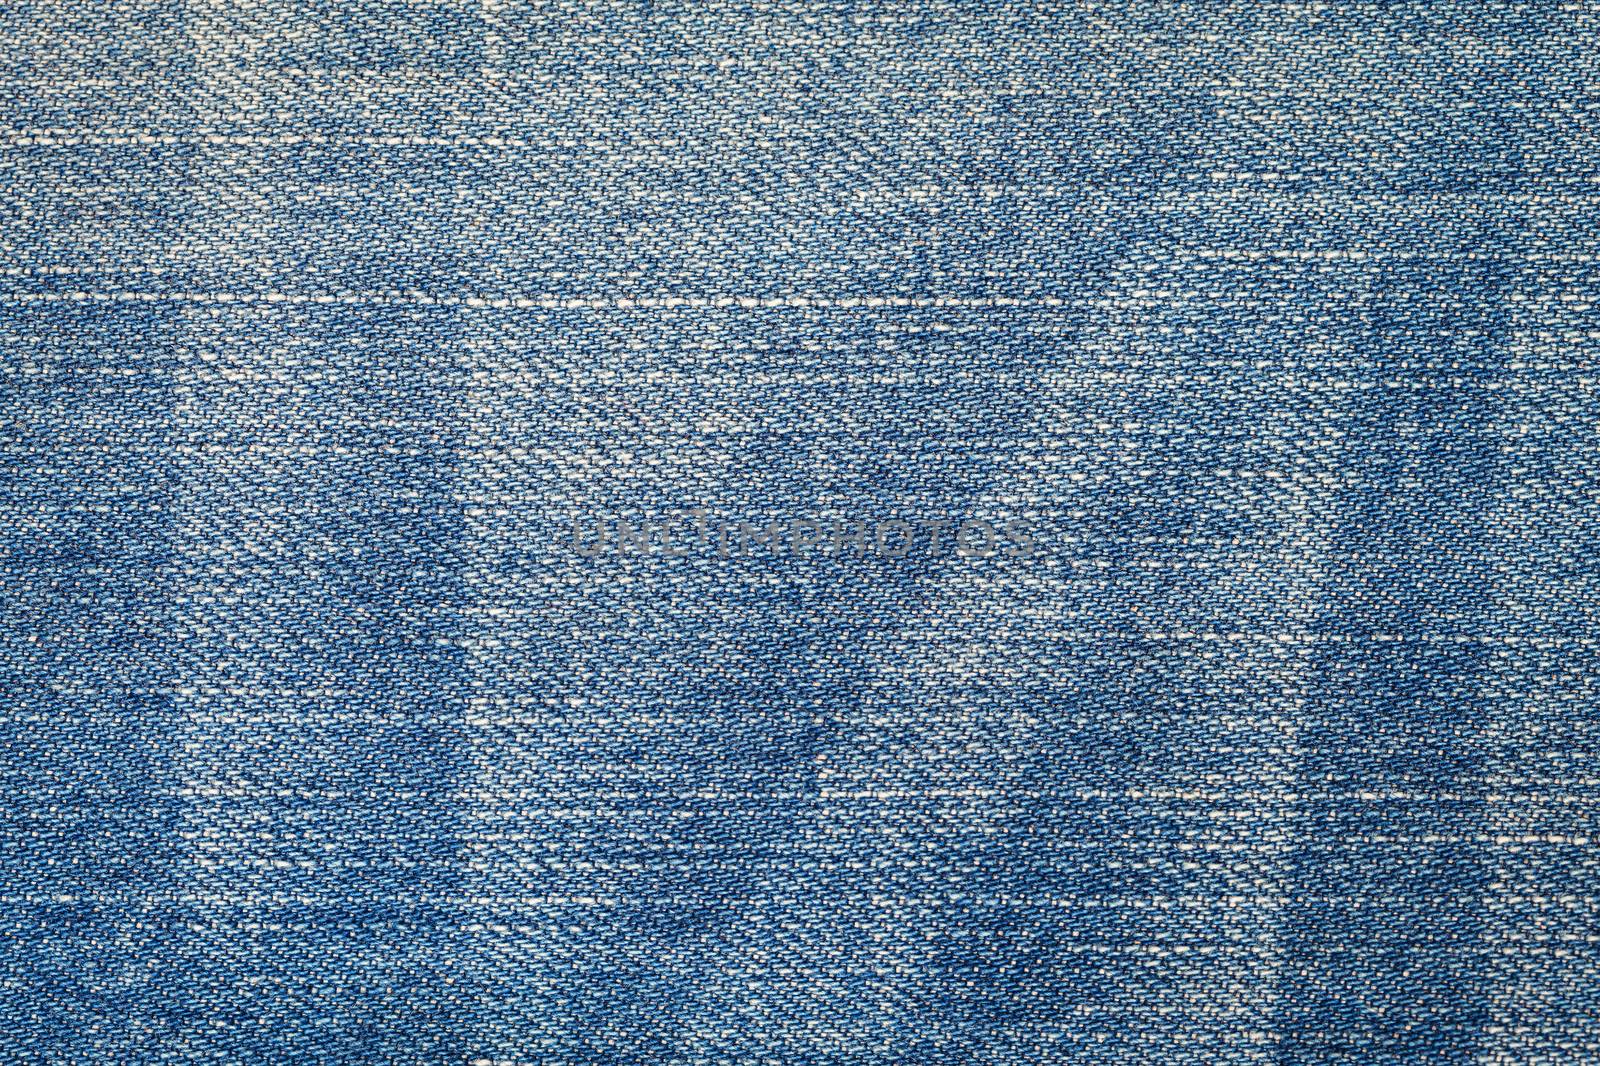 Denim texture or jean for background by FrameAngel